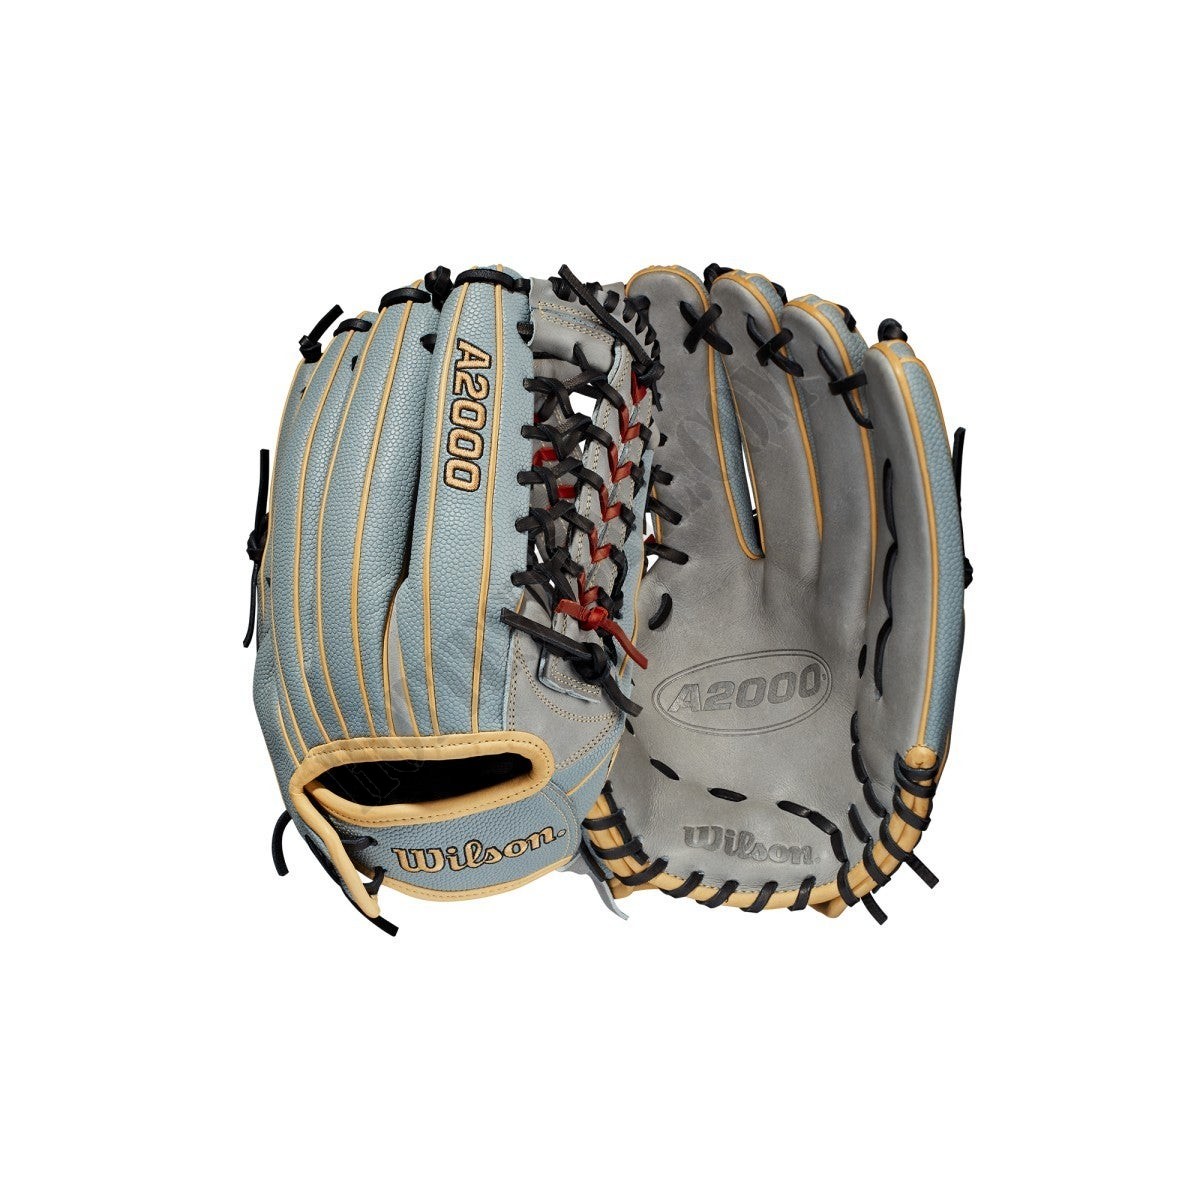 2021 A2000 T125SS 12.5" Outfield Fastpitch Glove ● Wilson Promotions - 2021 A2000 T125SS 12.5" Outfield Fastpitch Glove ● Wilson Promotions